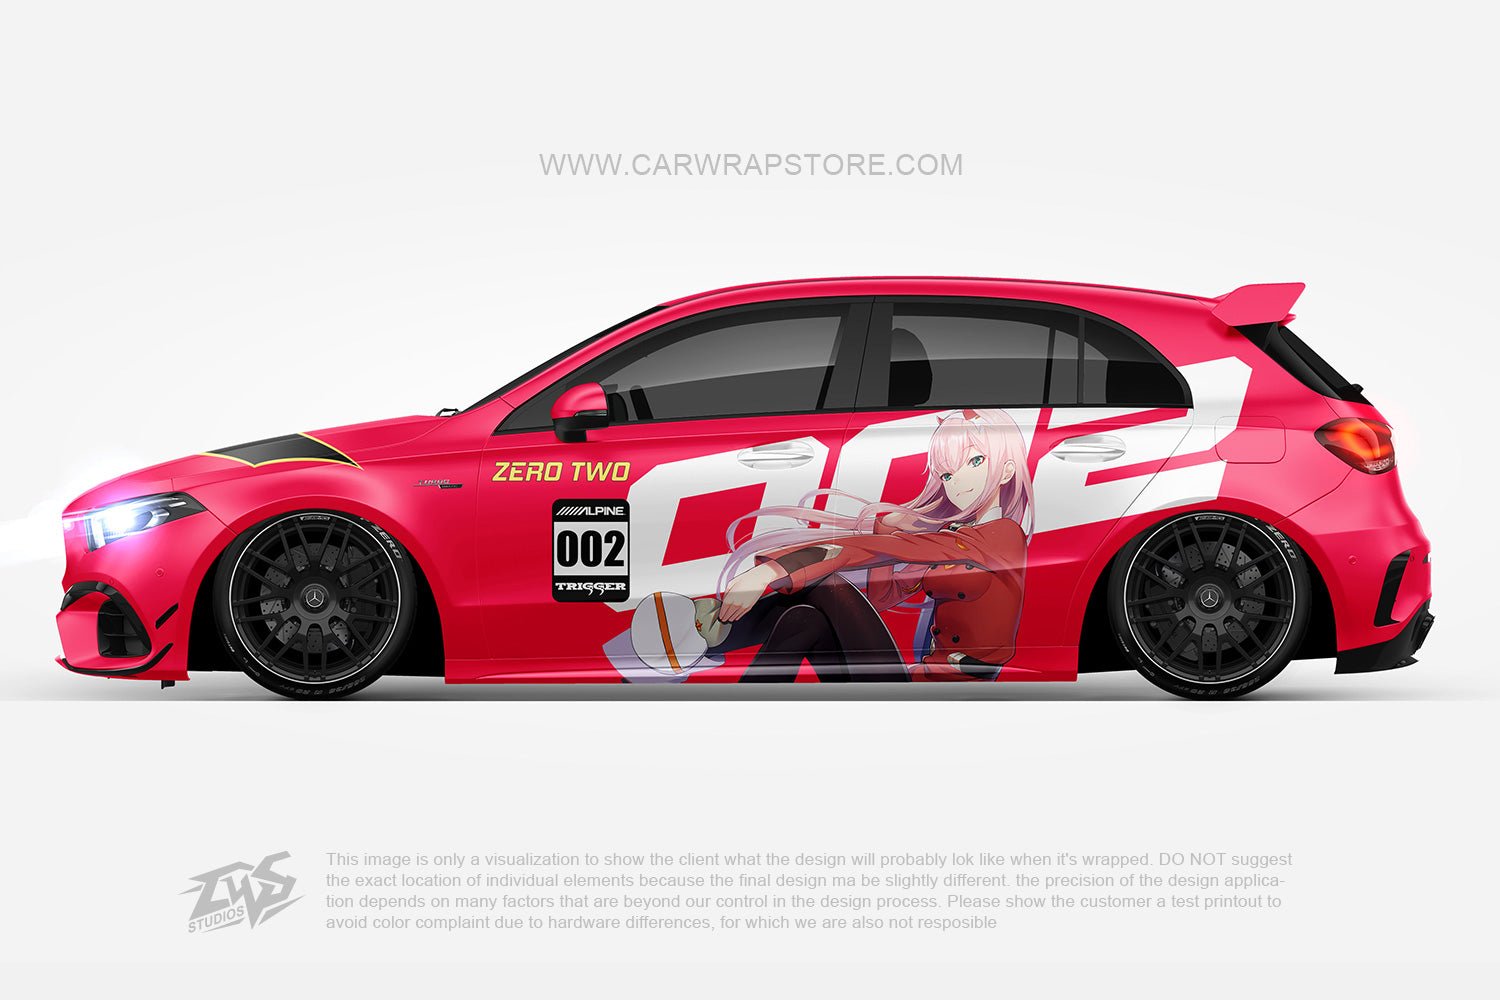 Zero Two DARLING in the FRANXX【002-10】 - Car Wrap Store